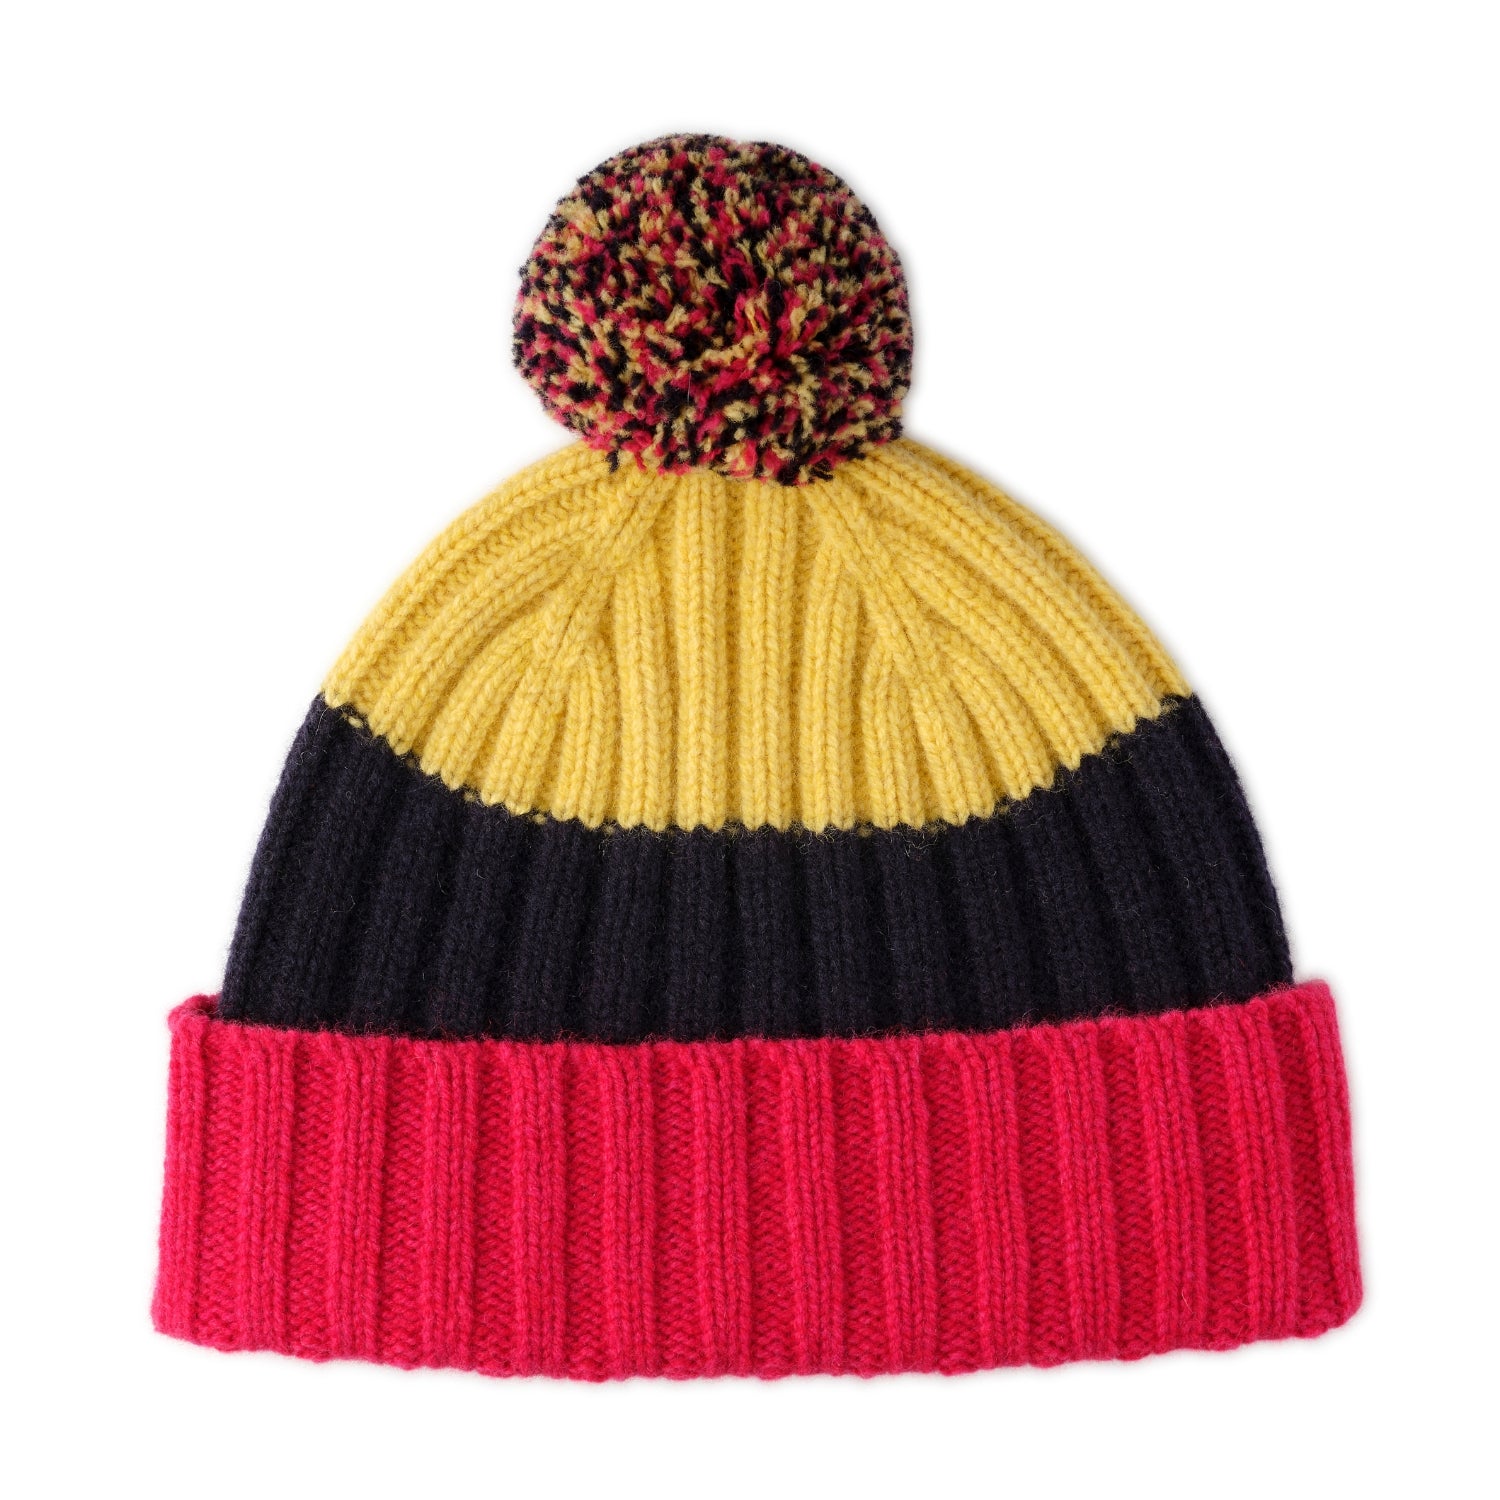 Chuncky lambswool beanie hat for ladies - red black and beige